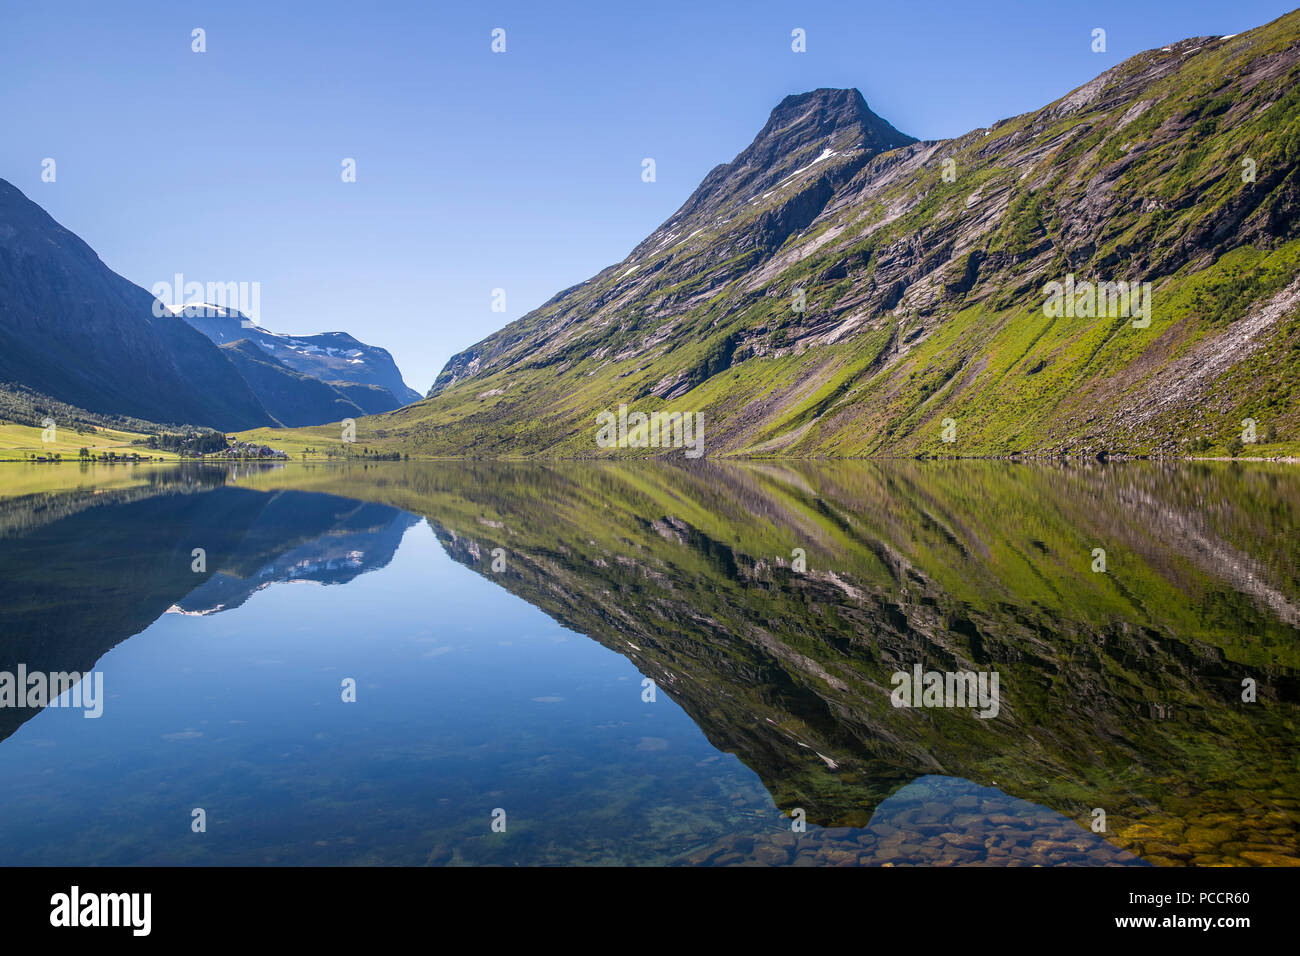 Beautiful reflection of mountains in the waters of Eidsvatnet lake Stock Photo